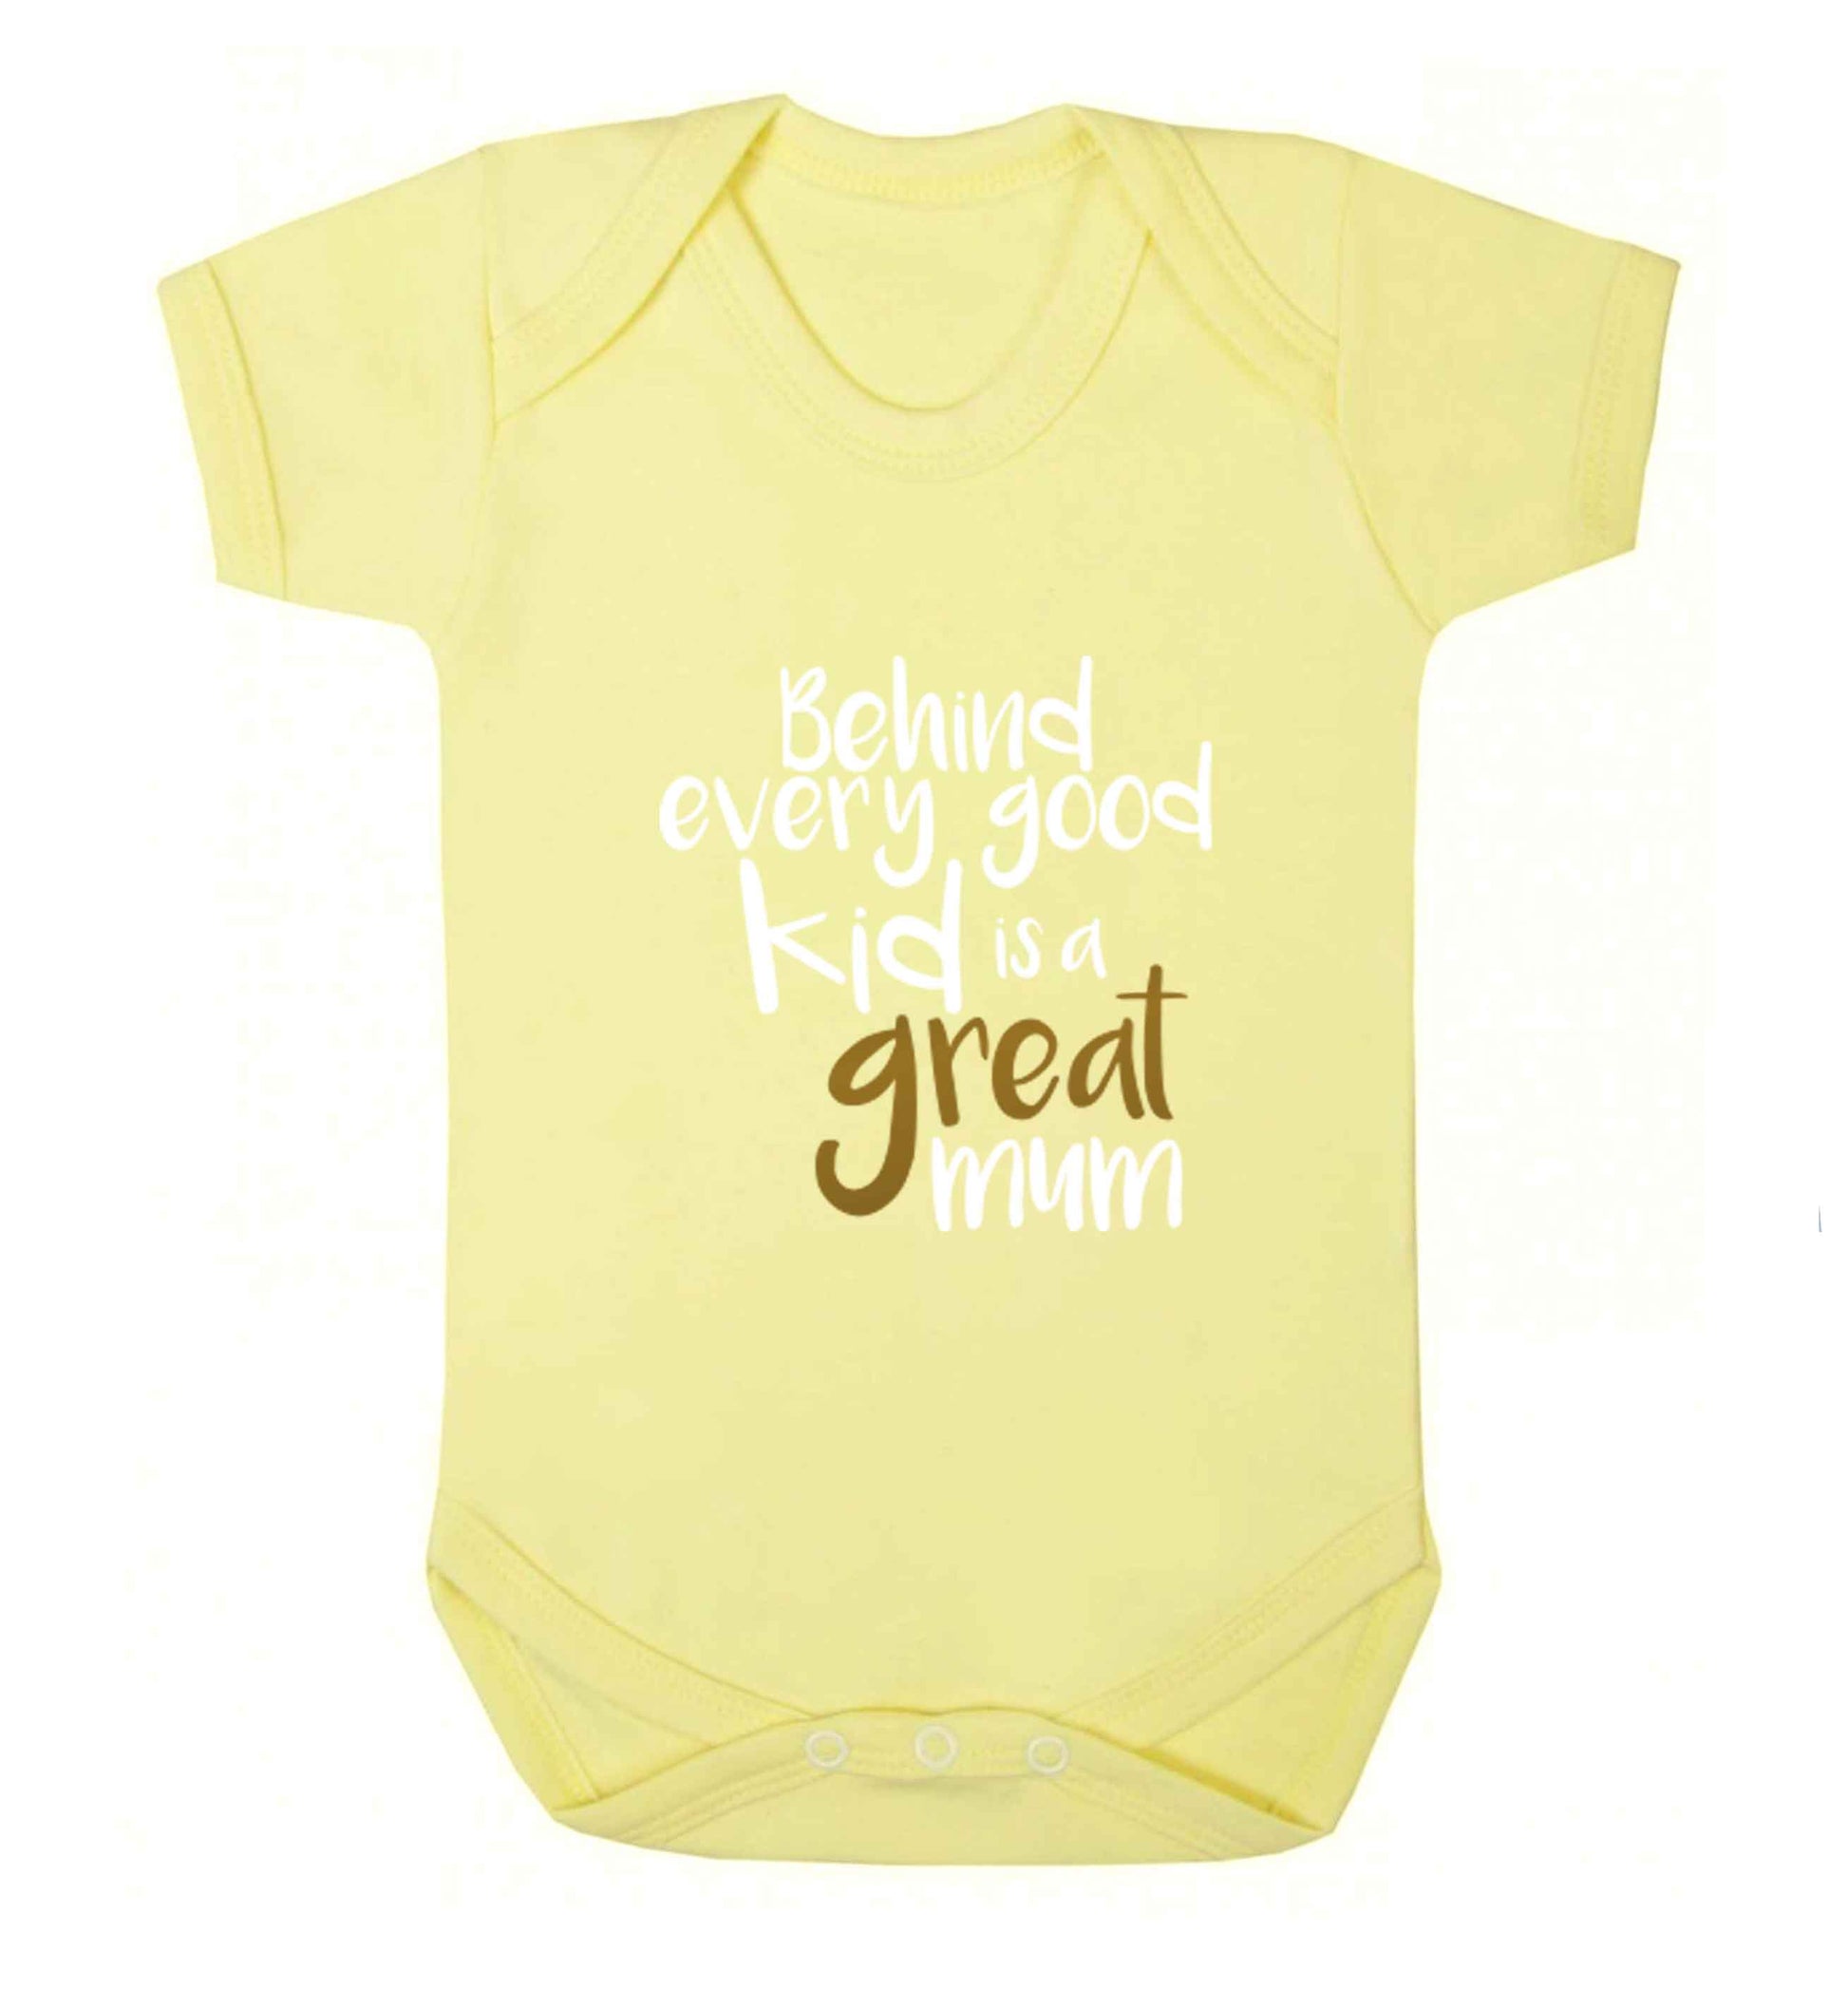 Behind every good kid is a great mum baby vest pale yellow 18-24 months